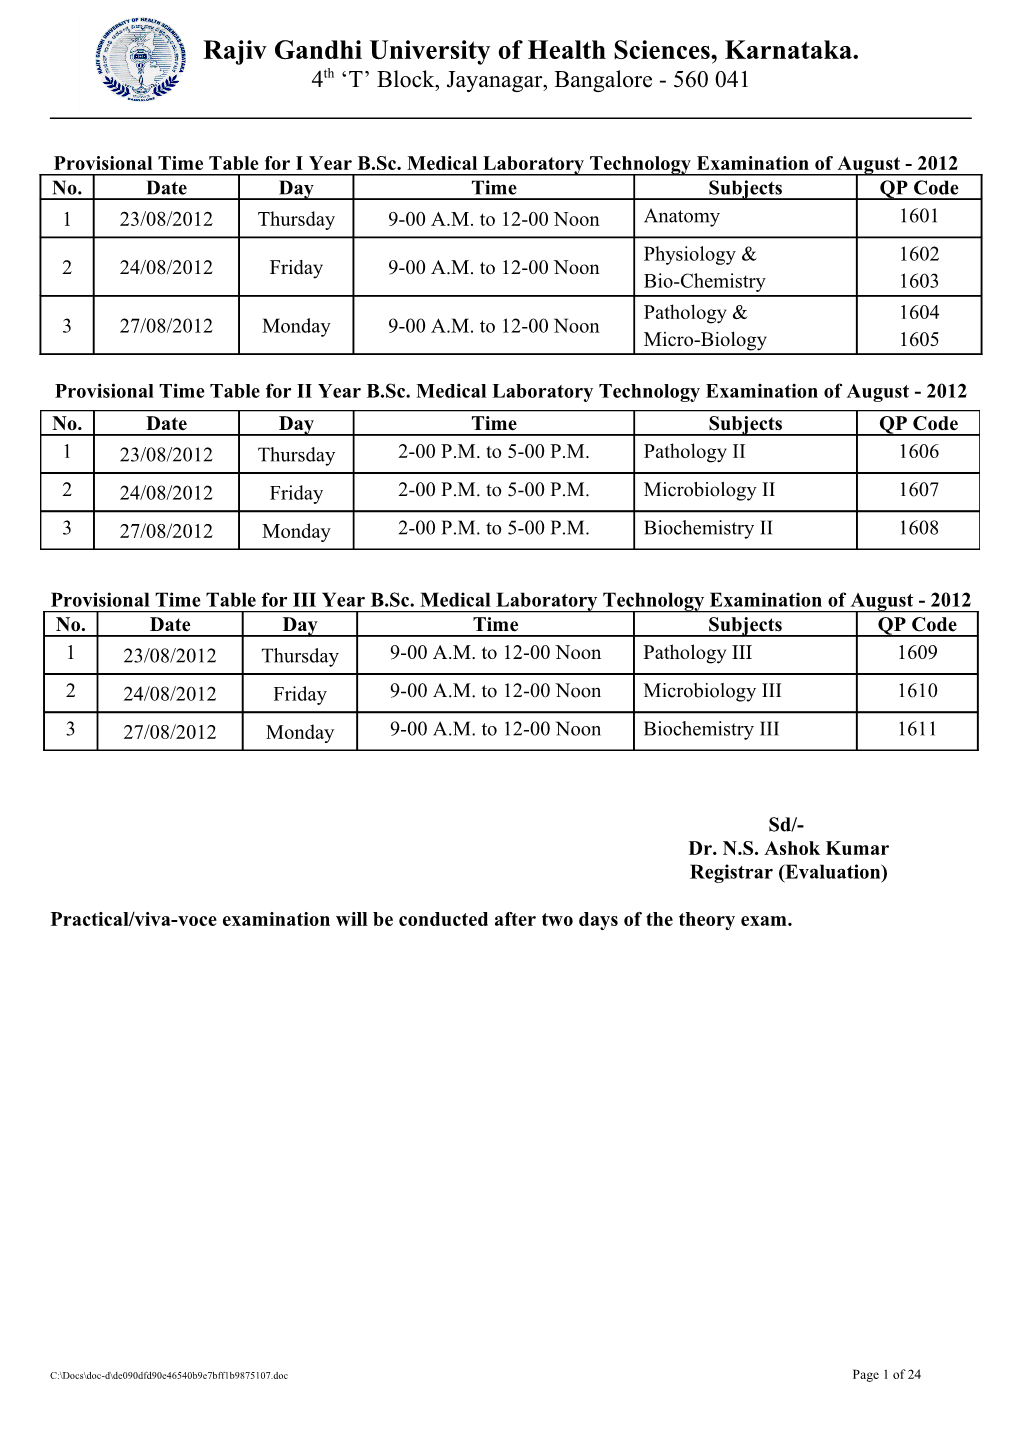 Provisional Time Table for I Year B.Sc. Medical Laboratory Technology Examination of August